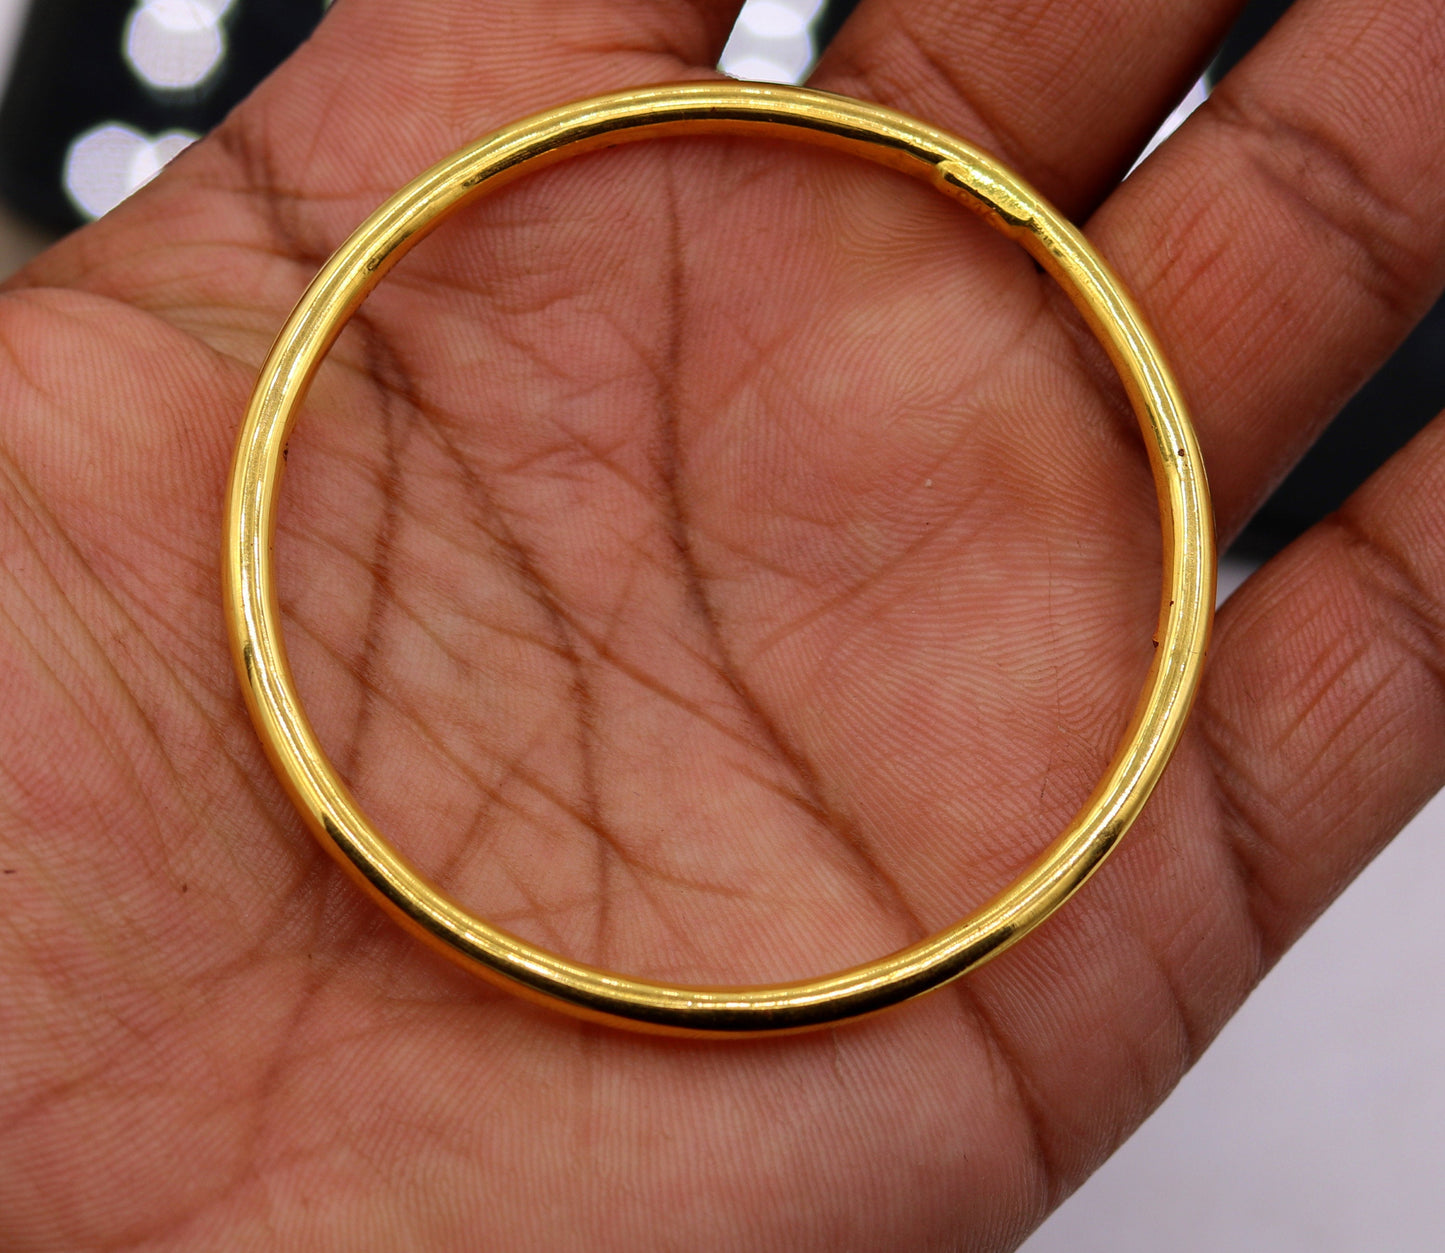 22k yellow gold handmade fabulous plain bangle bracelet with complete hallmarking sign jewelry for girls women - TRIBAL ORNAMENTS